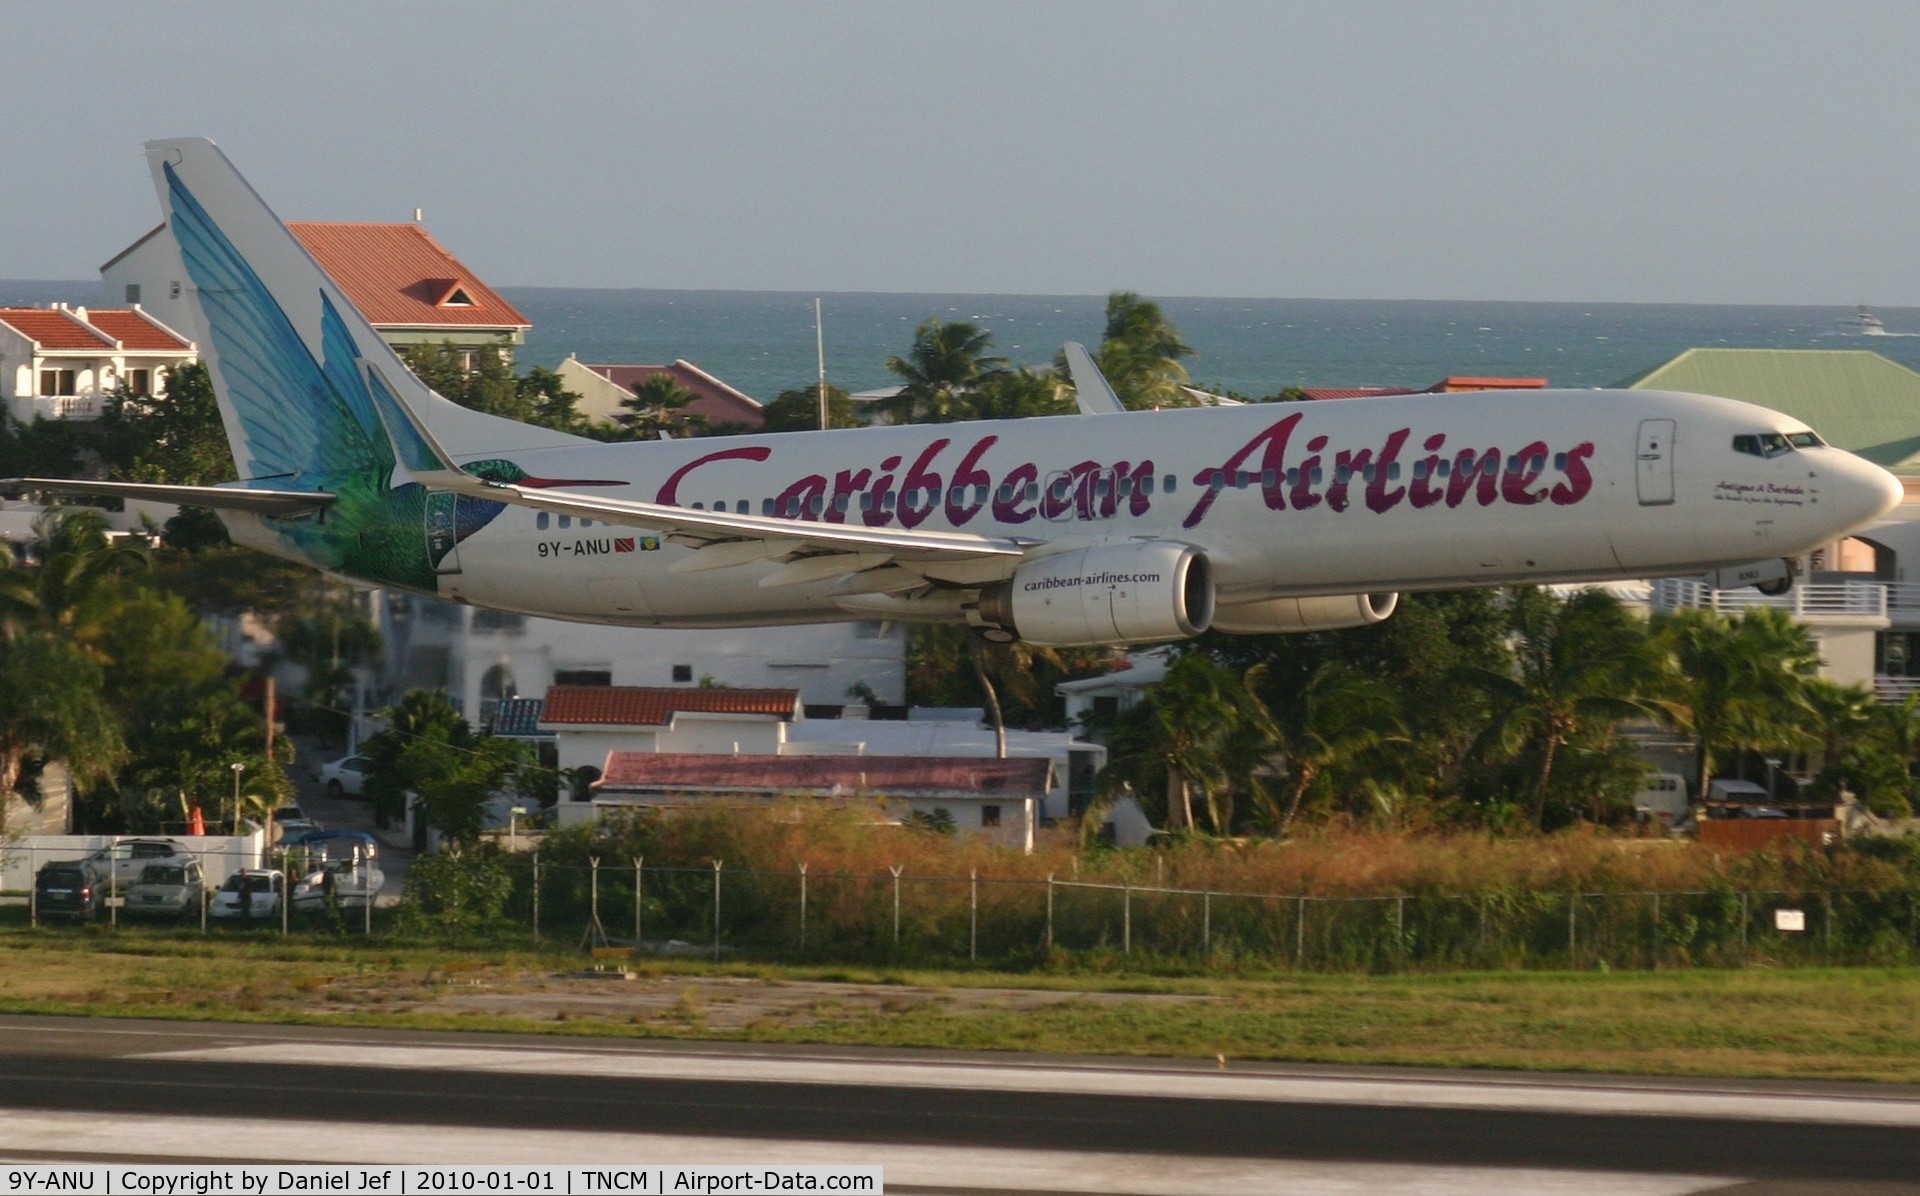 9Y-ANU, 2000 Boeing 737-8Q8 C/N 28235, Caribbean airlines 737 departing TNCM on runway 28 with an early gears up!!!